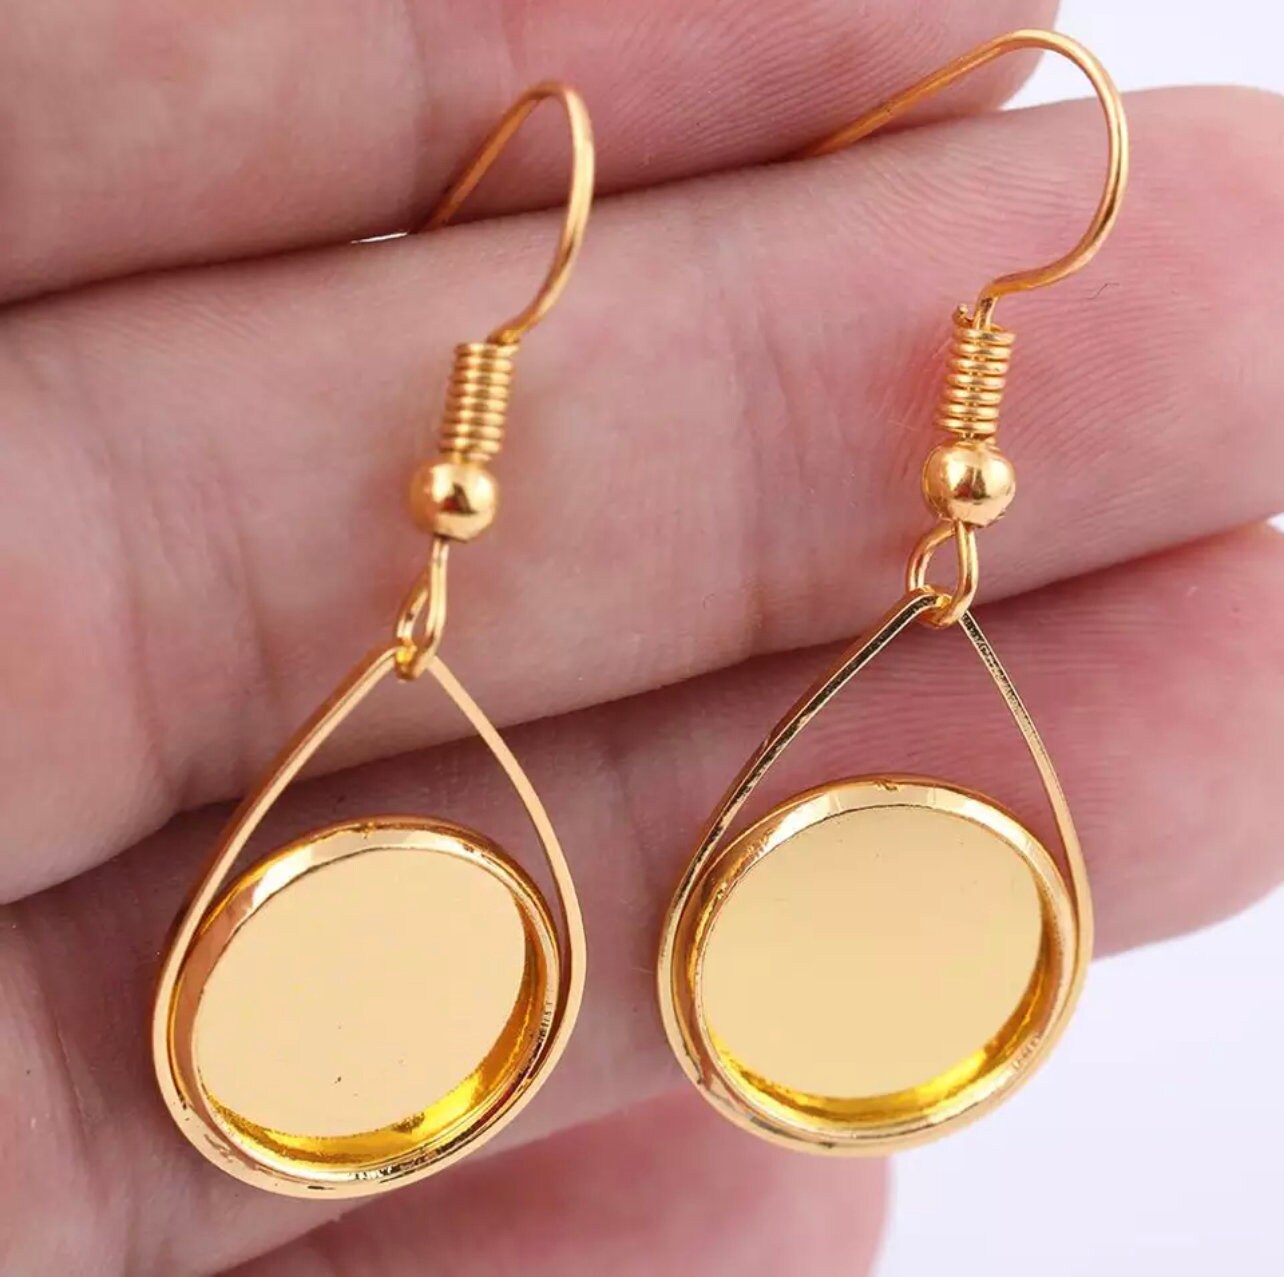 Earring Making Kits - Oval pendants, earring wires and matching glass Great Party Craft FREE shipping offer DIY jewelry